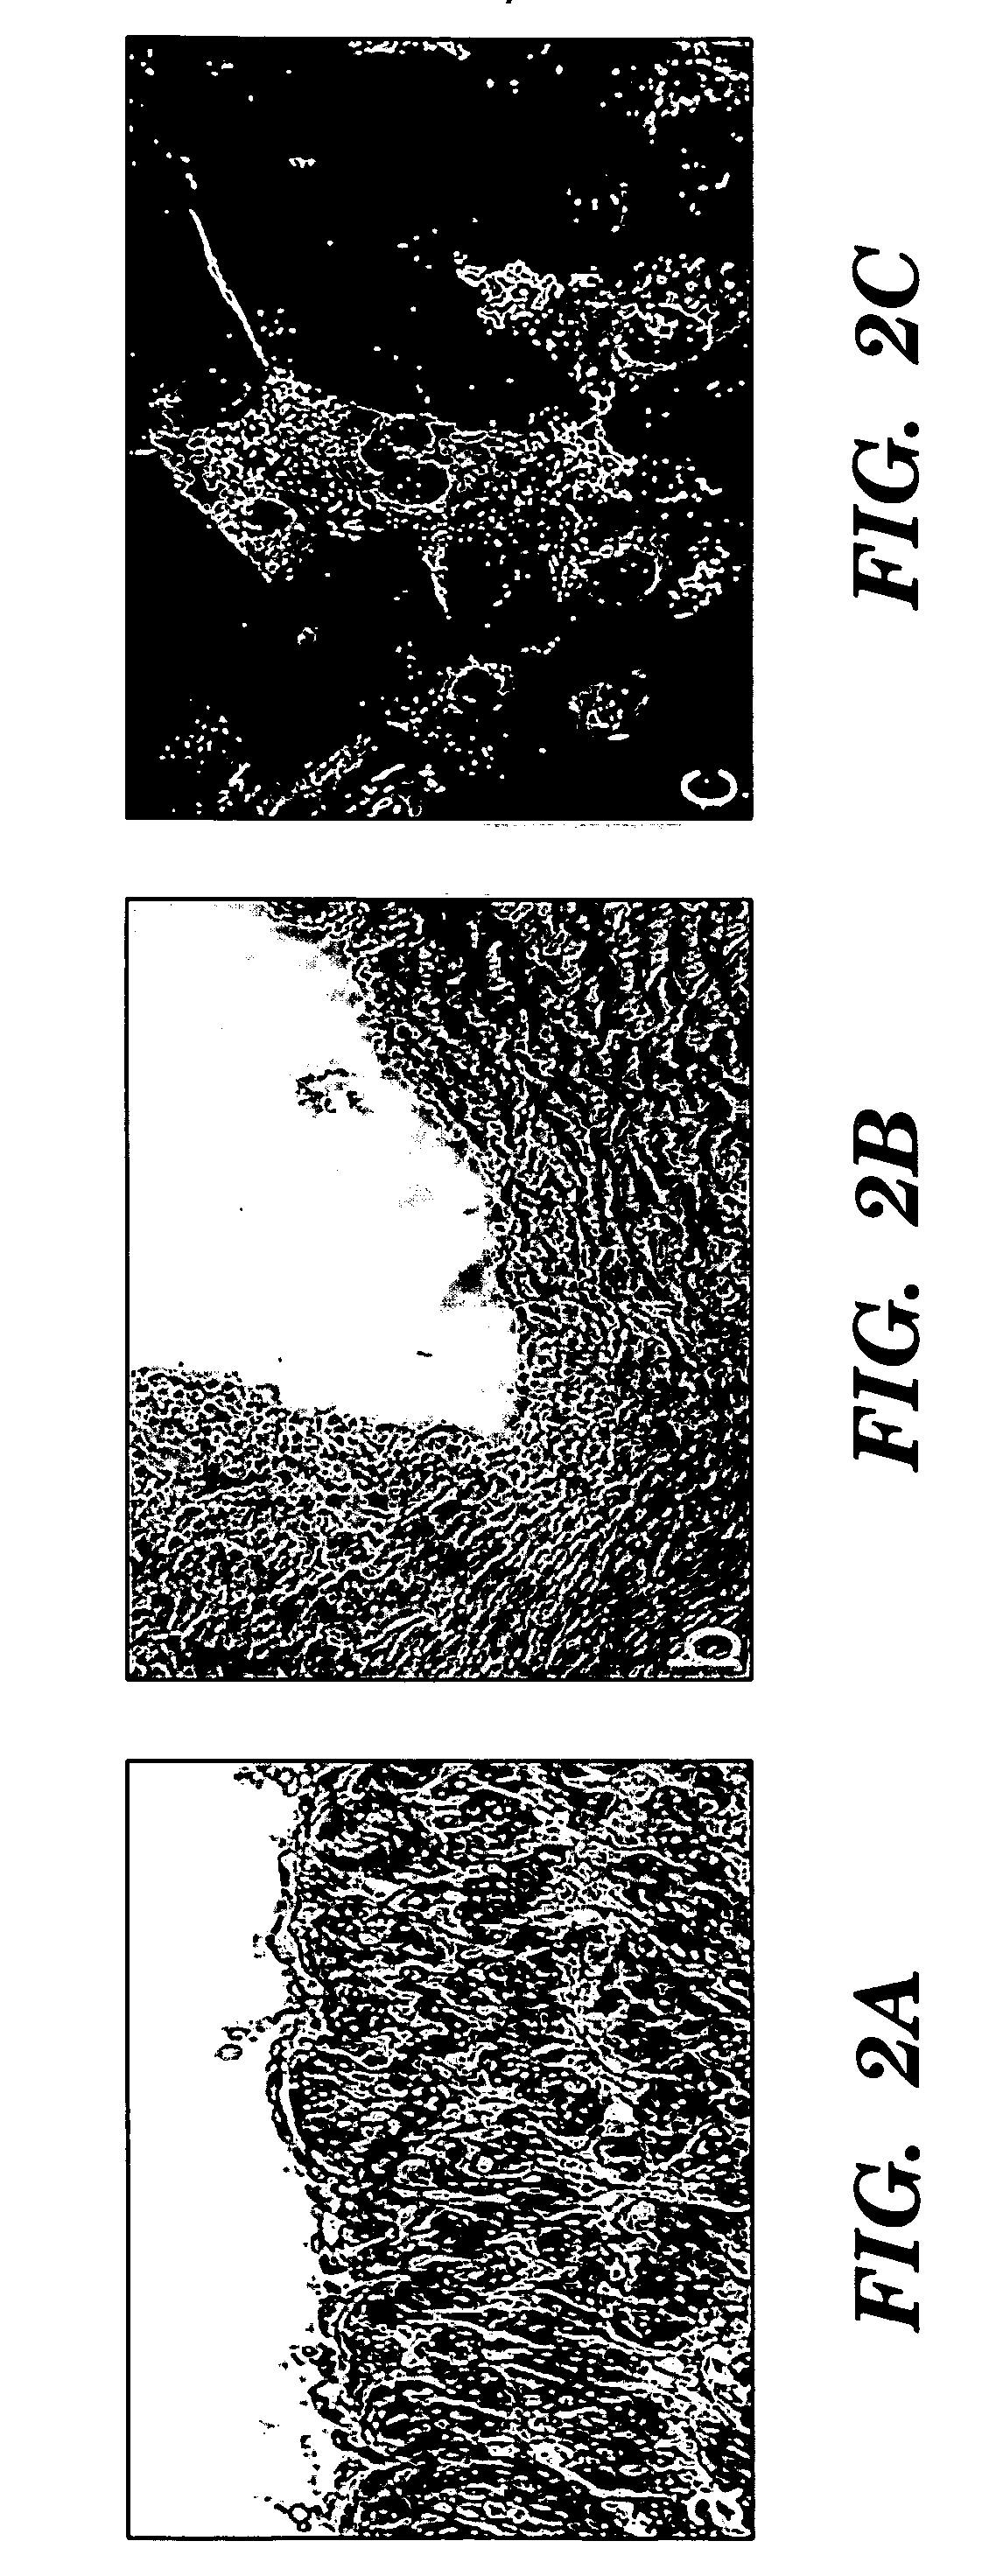 Method of isolating cells from umbilical cord